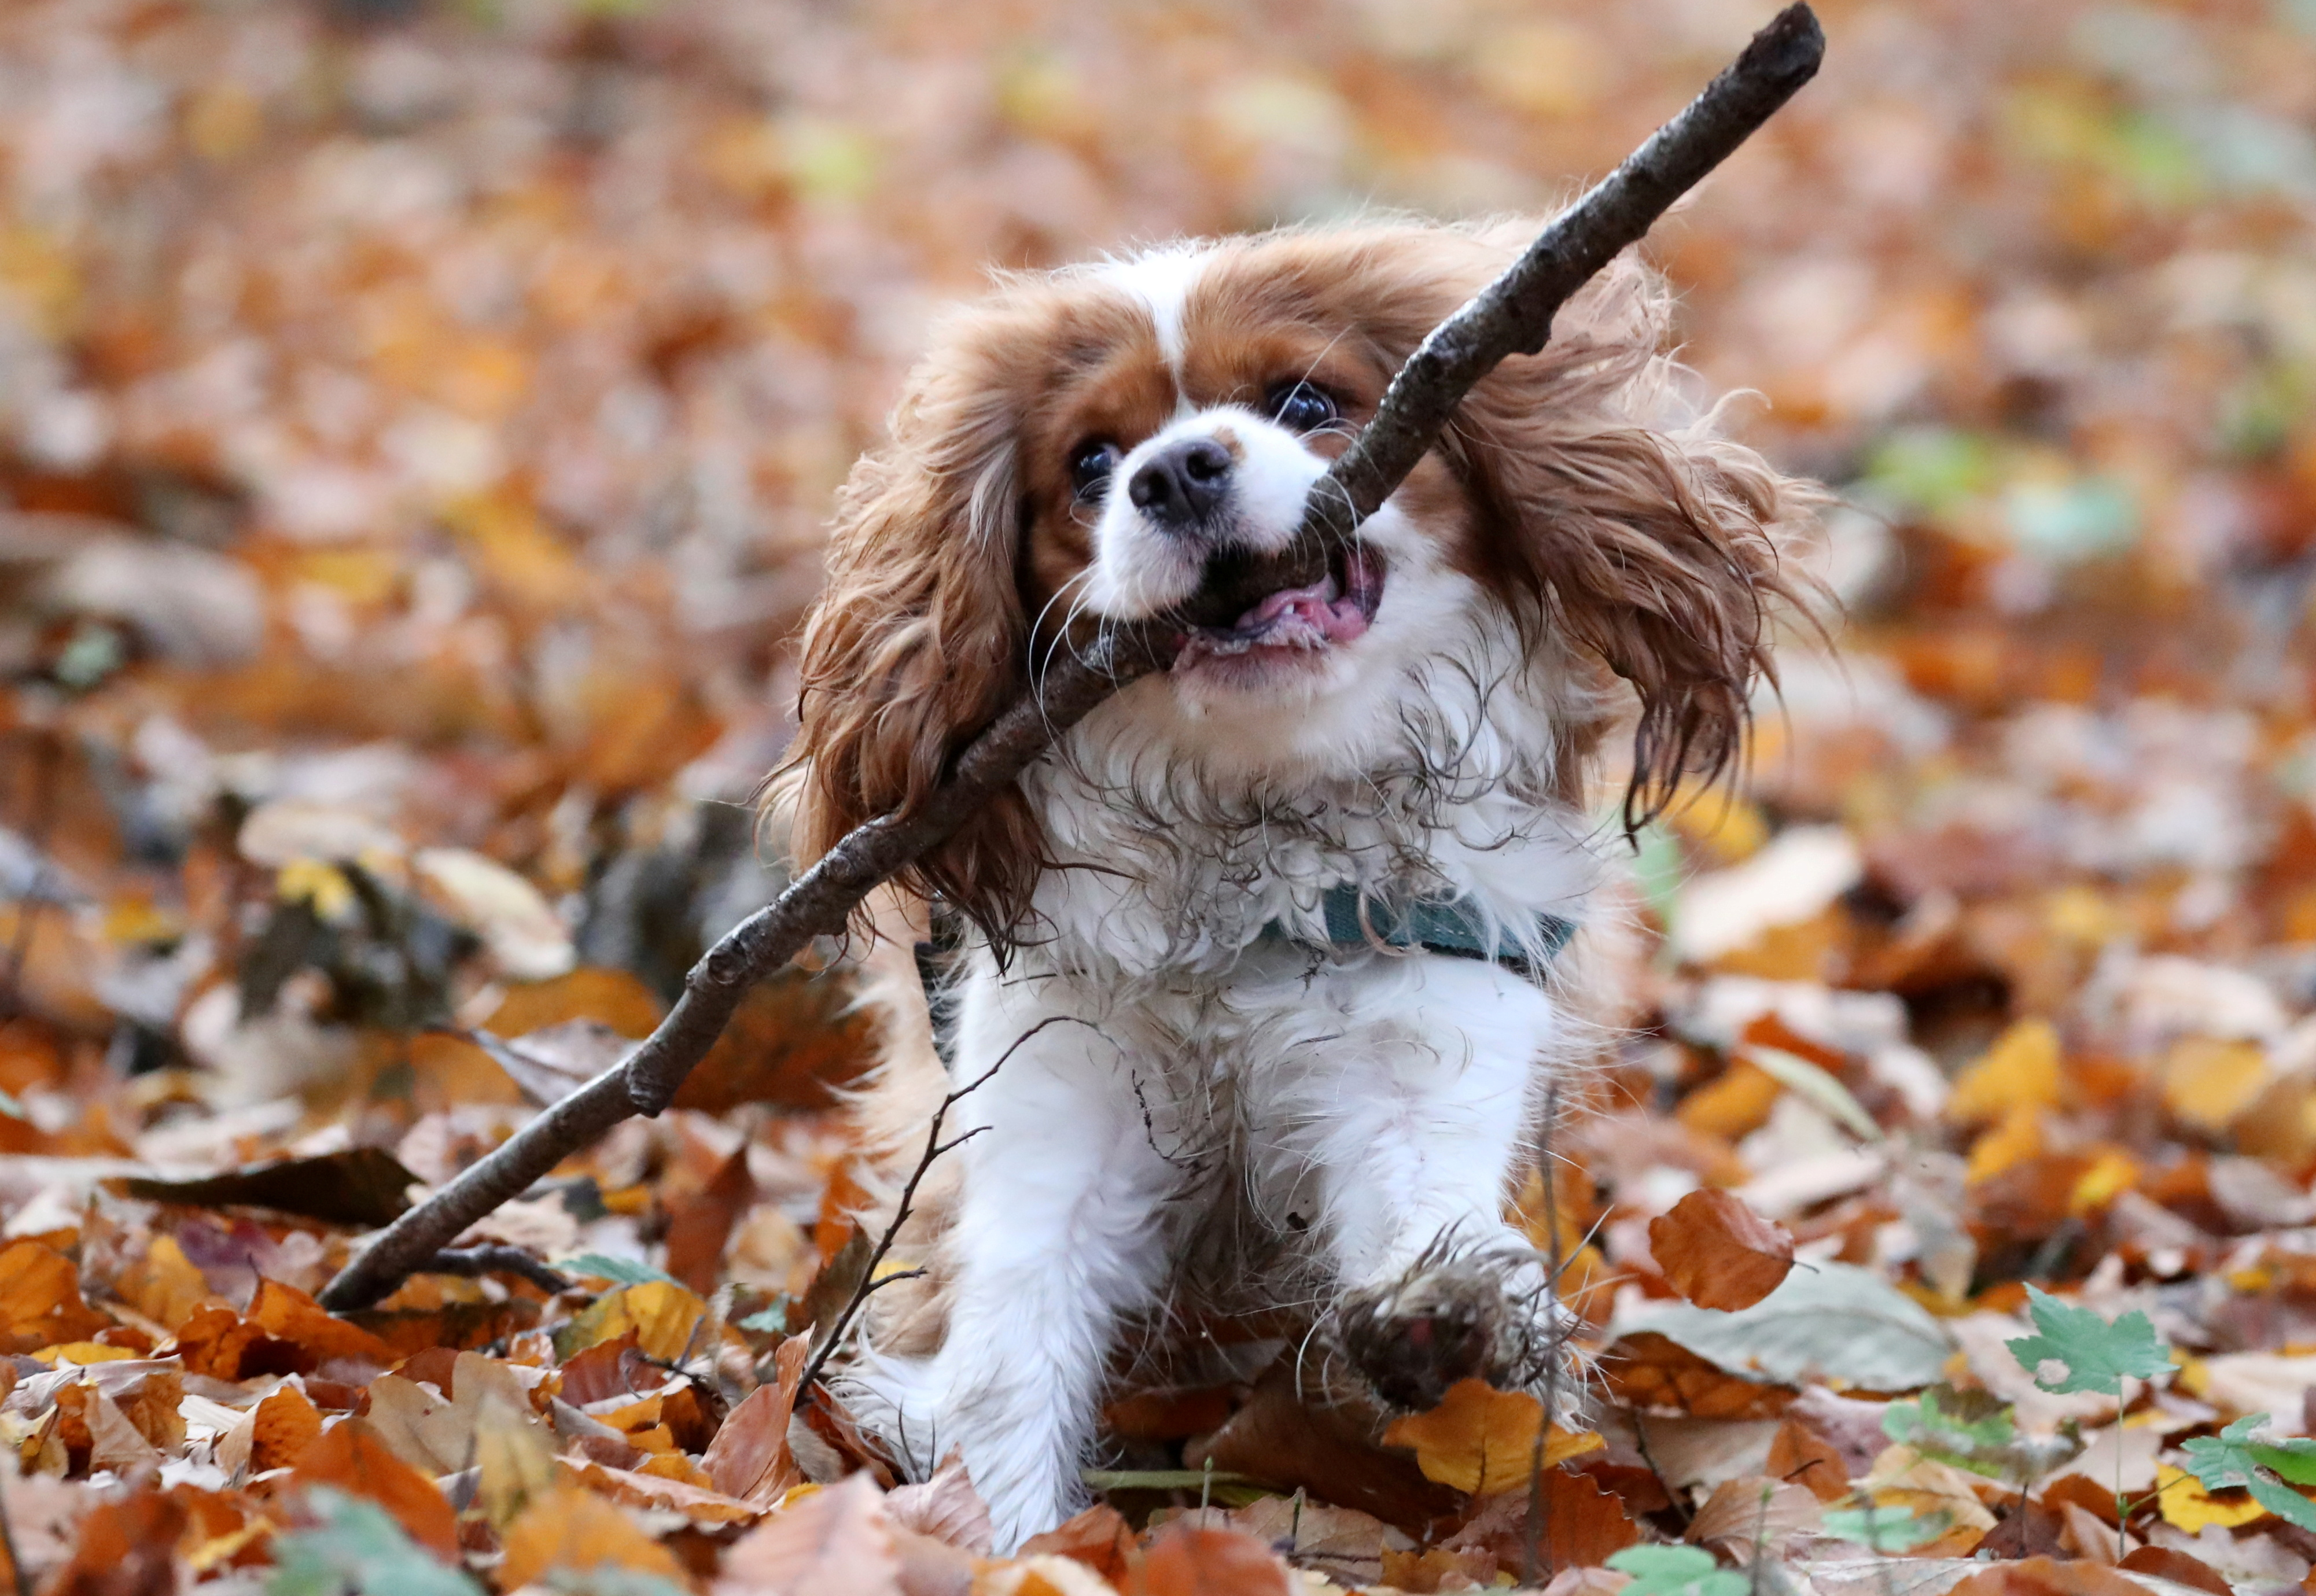 A dog runs with a stick in a forest in Gaasbeek, near Brussels, Belgium November 20, 2020.  REUTERS/Yves Herman/File Photo